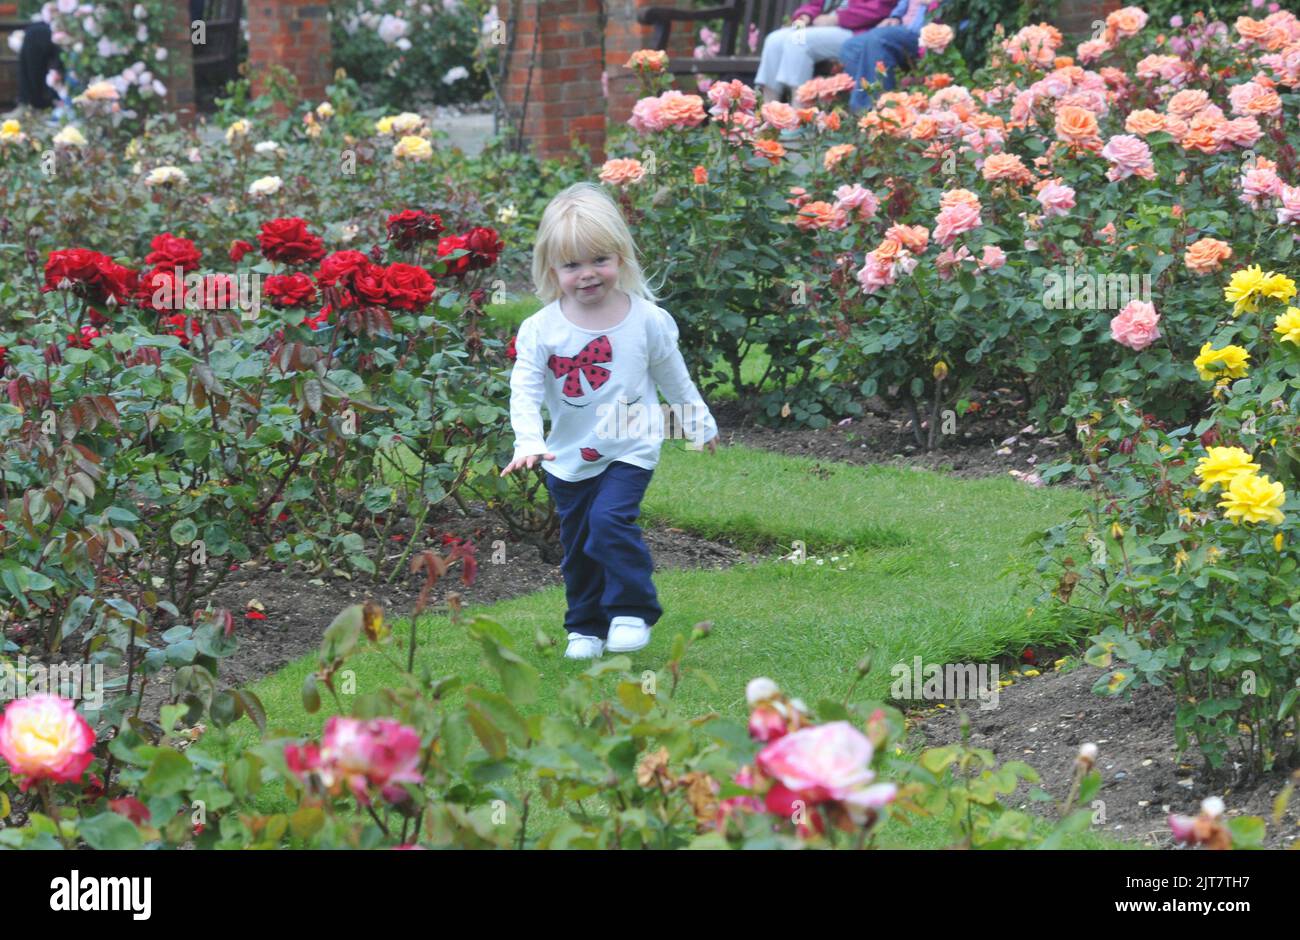 2 YEAR OLD LILY EVANS MAKES THE MOST OF THE WEATHER TO ENJOY A STROLL AMONGST THE ROSES AT THE ROSE GARDEN AT SOUTHSEA, HANTS. PIC MIKE WALKER, MIKE WALKER PICTURES,2012 Stock Photo